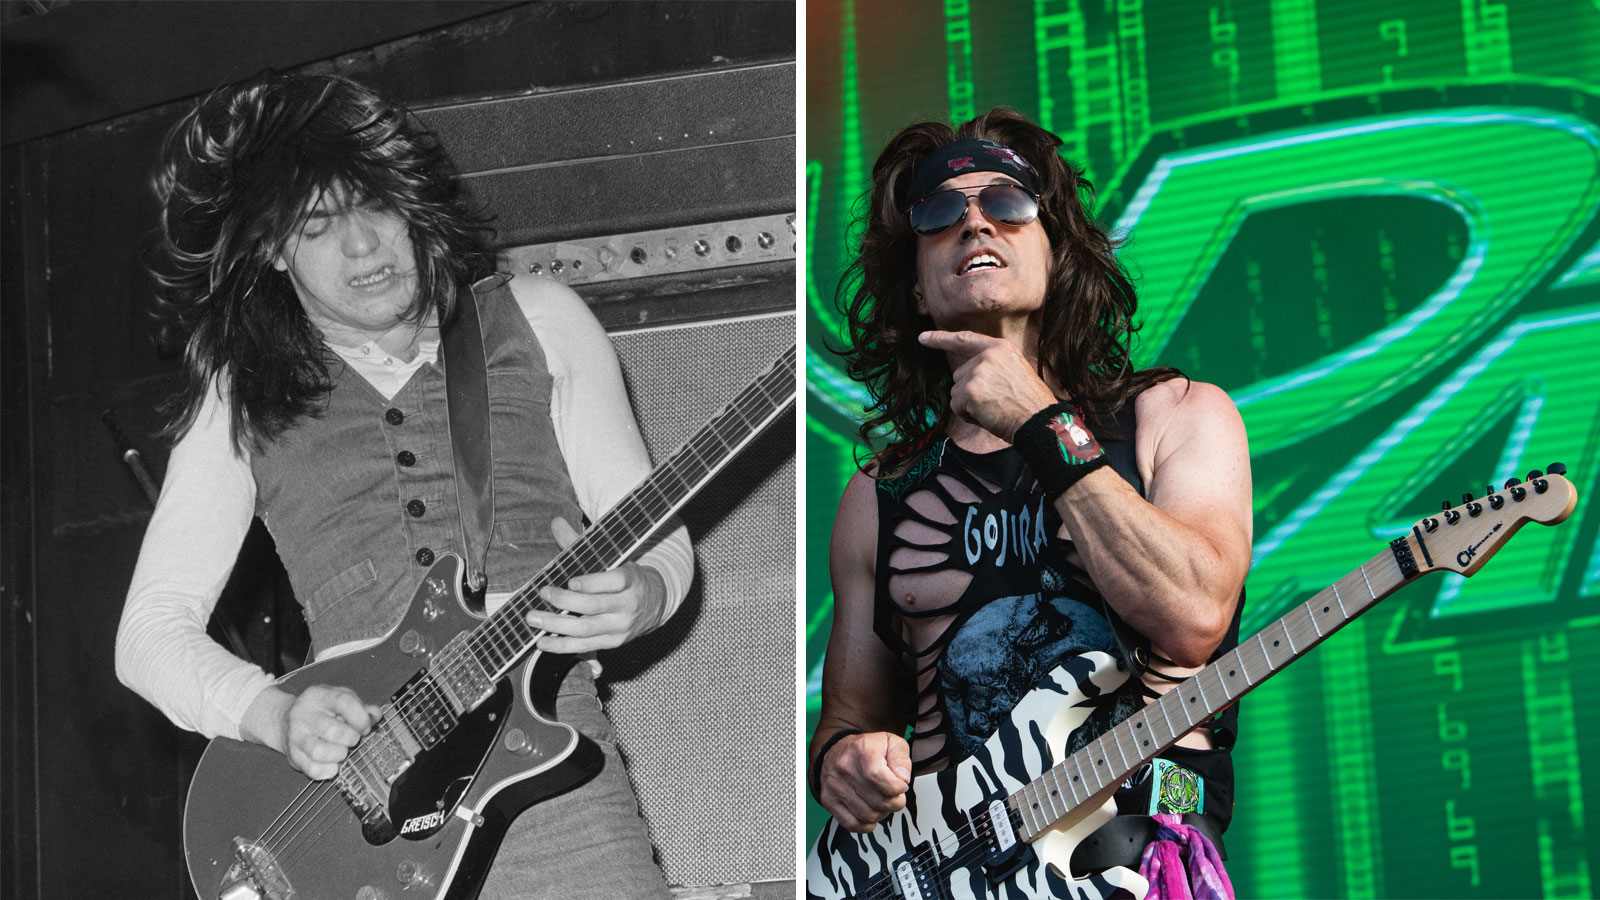 Satchel: Malcolm Young influenced more guitarists than Eddie Van Halen or Eric Clapton